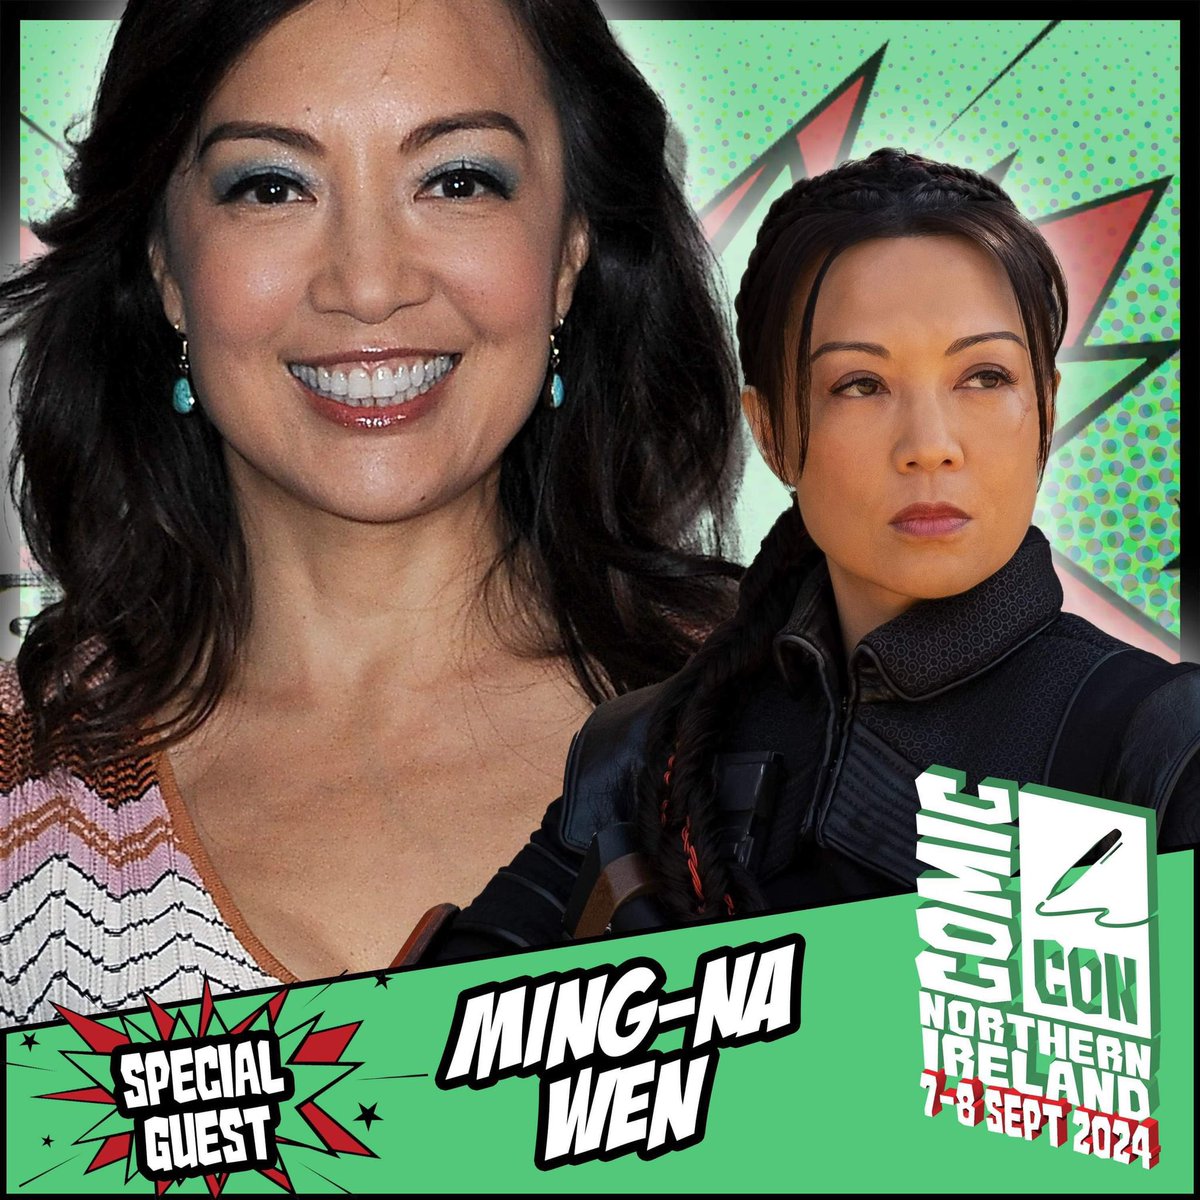 Comic Con Northern Ireland welcomes Ming-Na Wen, known for projects such as The Mandalorian, Mulan, Agents of S.H.I.E.L.D, and many more. Appearing 7-8 September! Tickets: comicconnorthernireland.co.uk